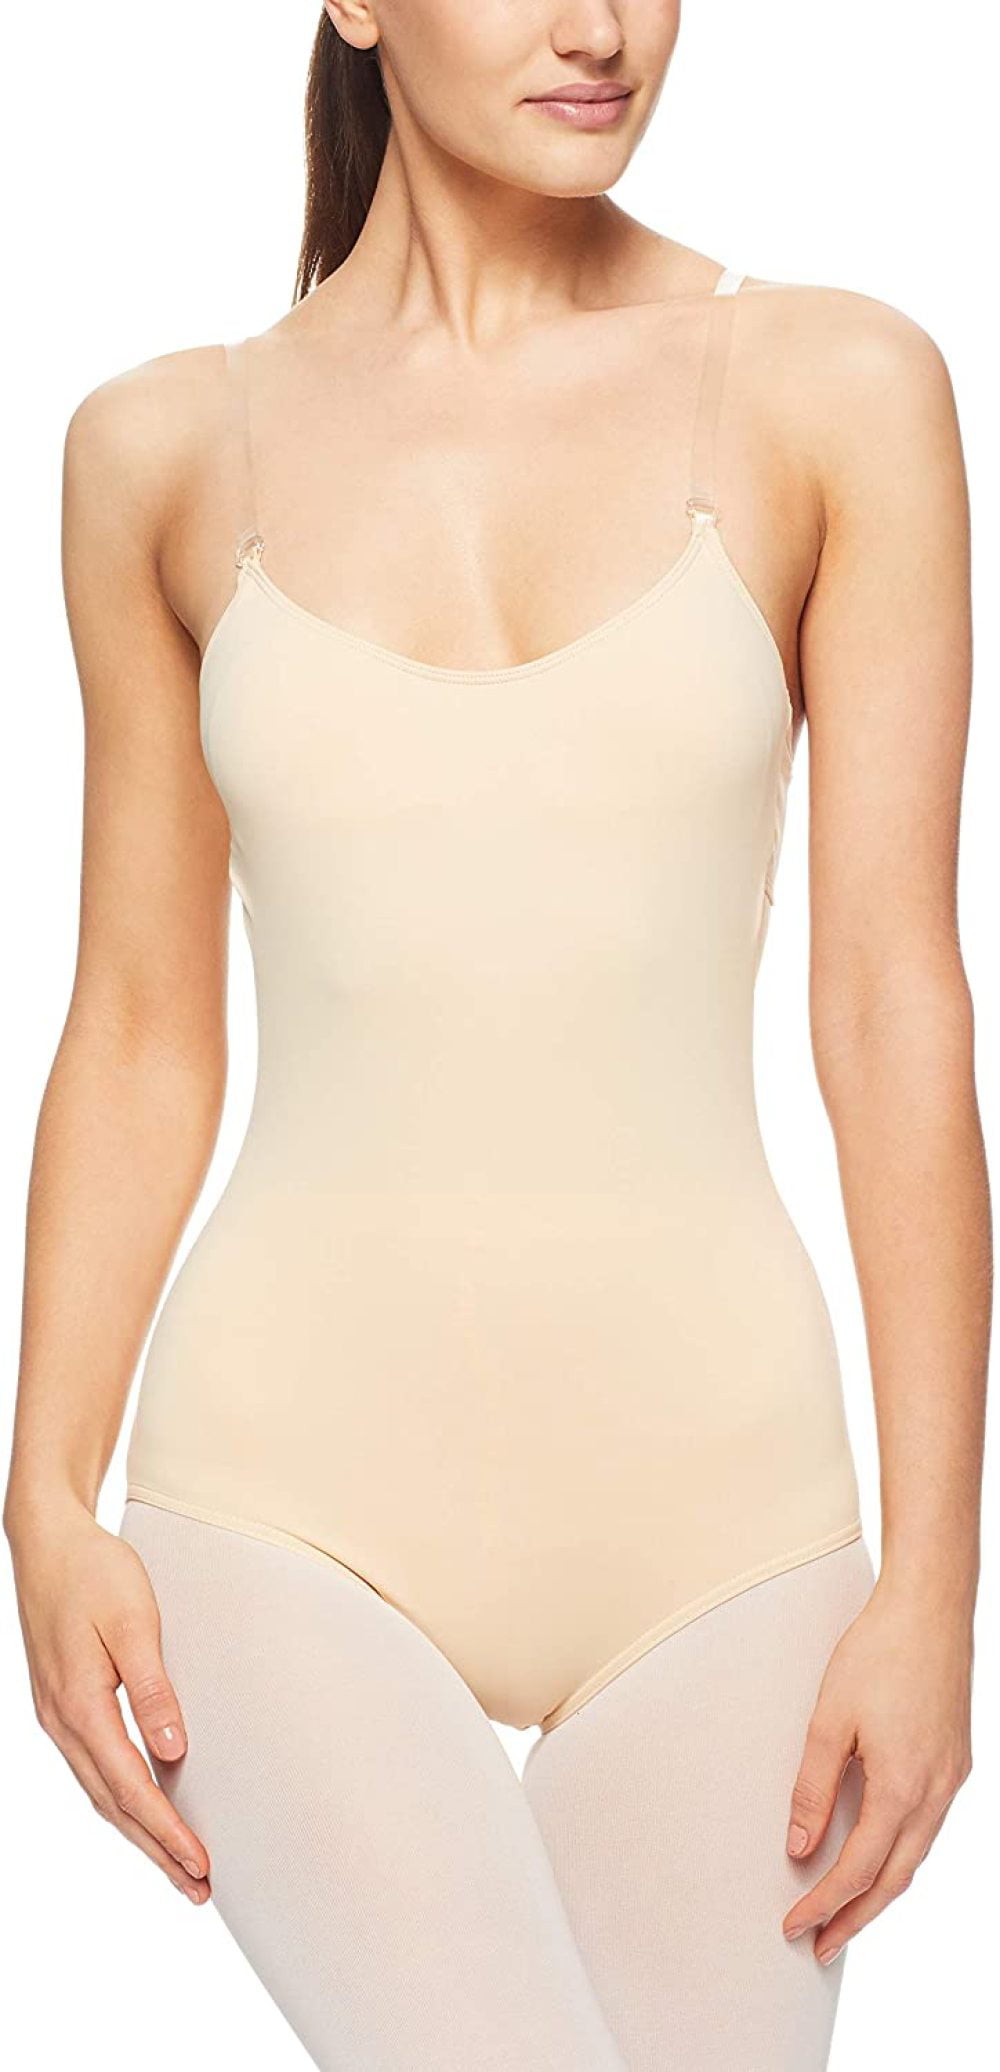 NEW Dance Leotard Camisole Clear Straps MOCHA Nude Underleo SKIN COLOR ALL SIZES 